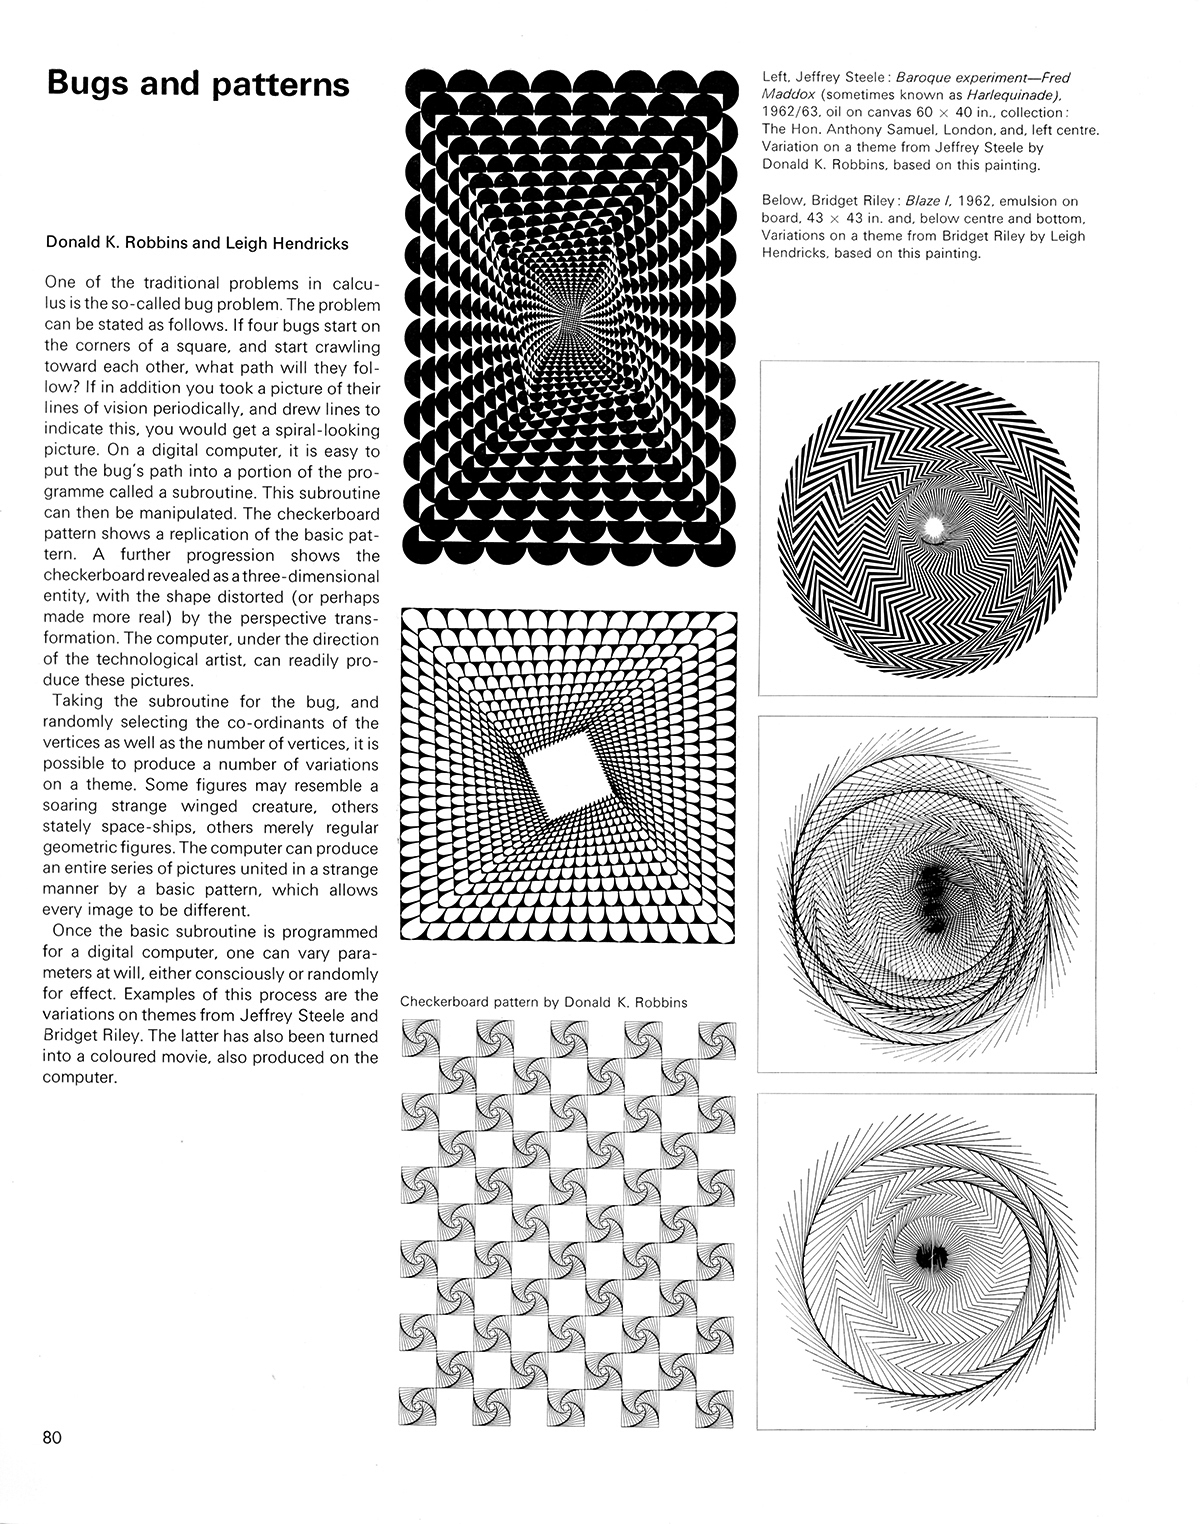 Cybernetic Serendipity: the computer and the arts. Page 80. Published by Studio International (special issue), 1968. © Studio International Foundation.